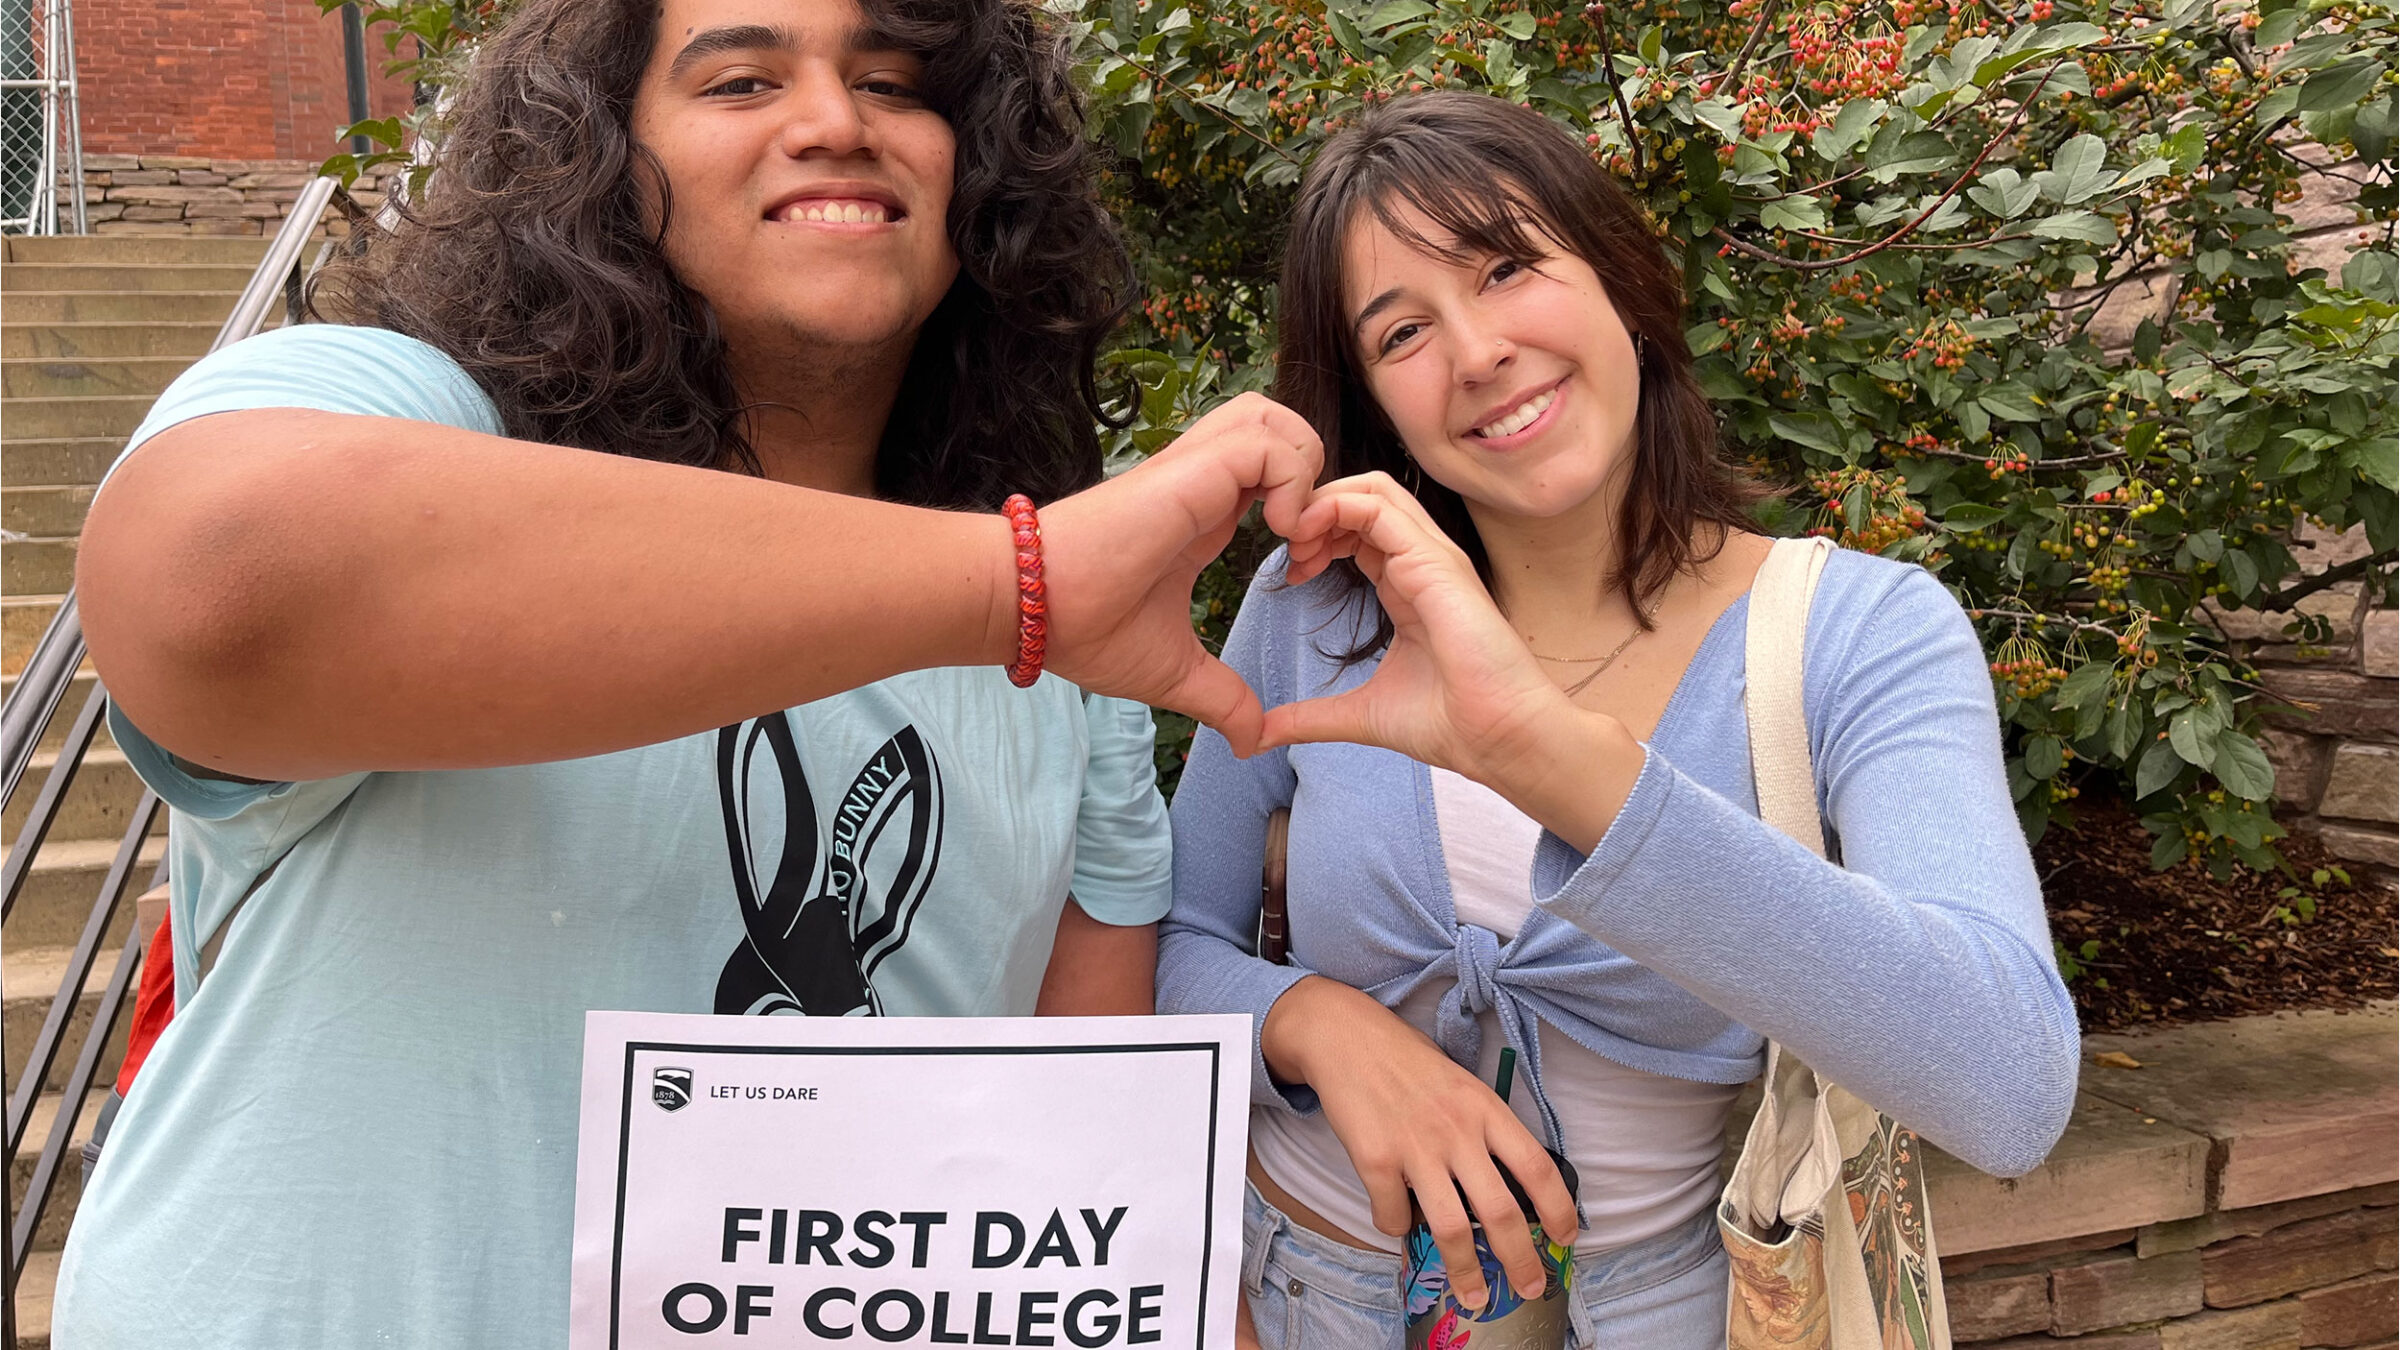 two students make a heart with their joining hands and hold up a sign that says "first day of school"